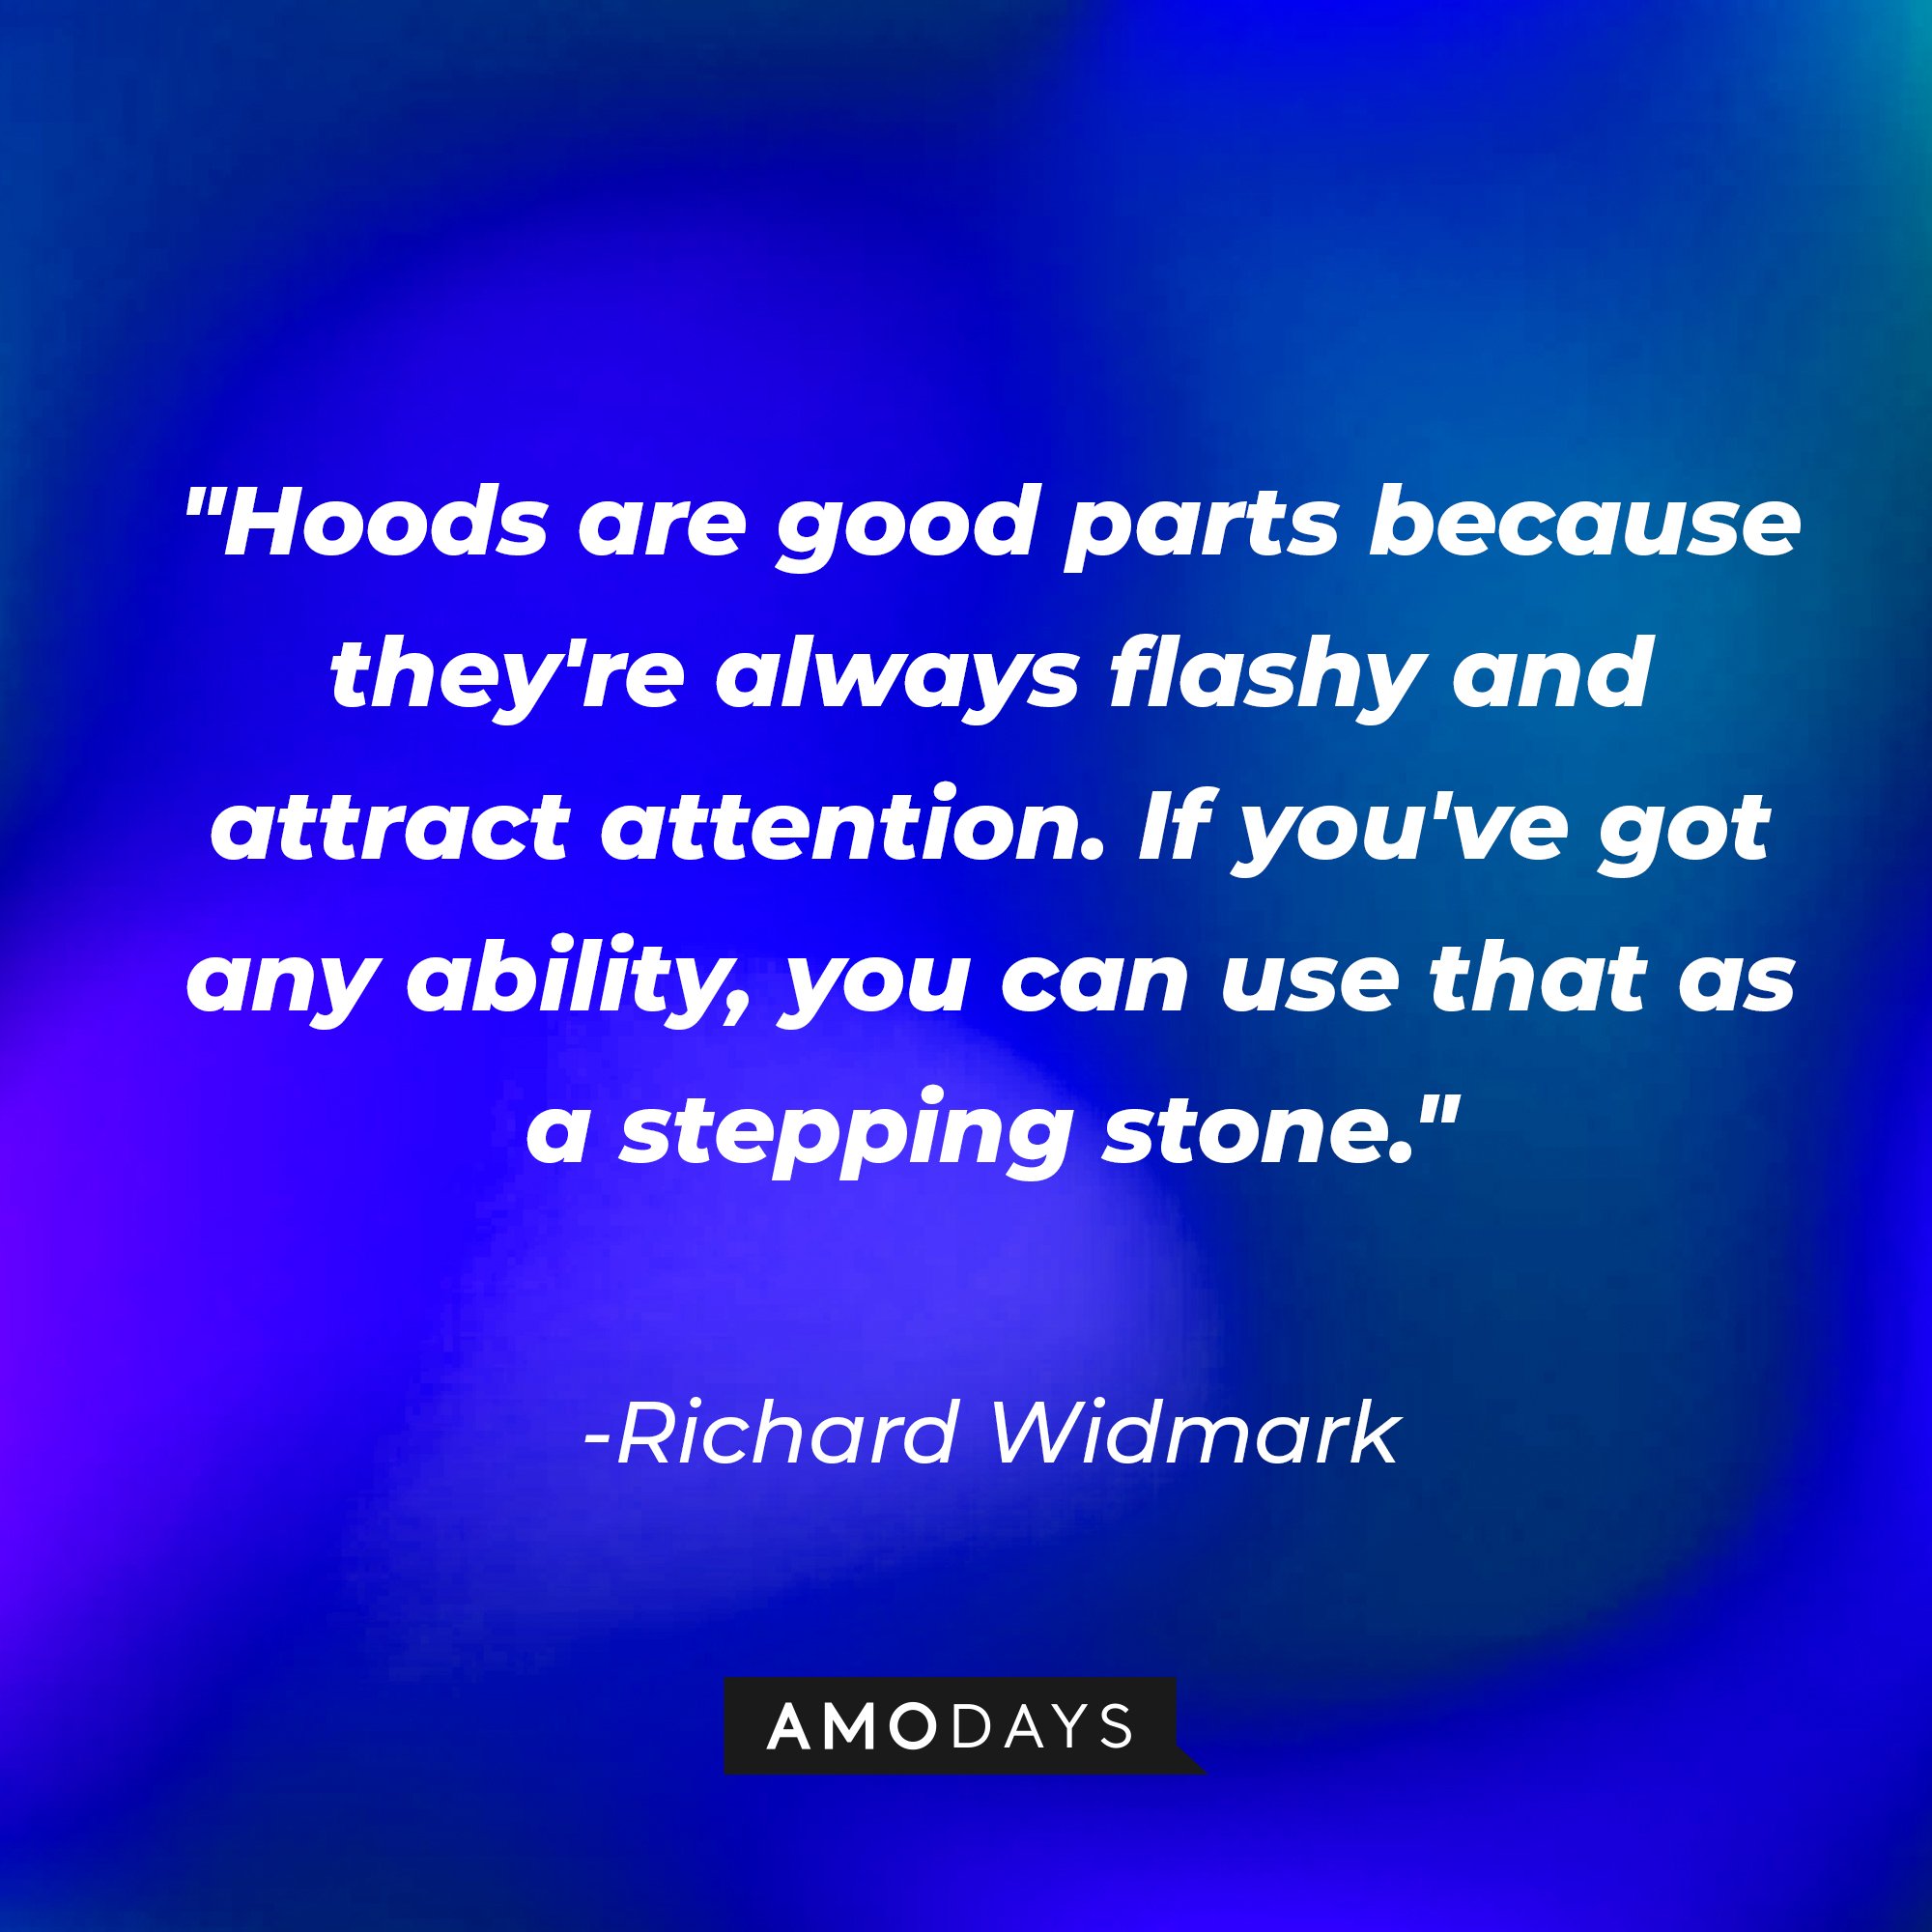 Richard Widmark's quote: "Hoods are good parts because they're always flashy and attract attention. If you've got any ability, you can use that as a stepping stone." | Image: AmoDays